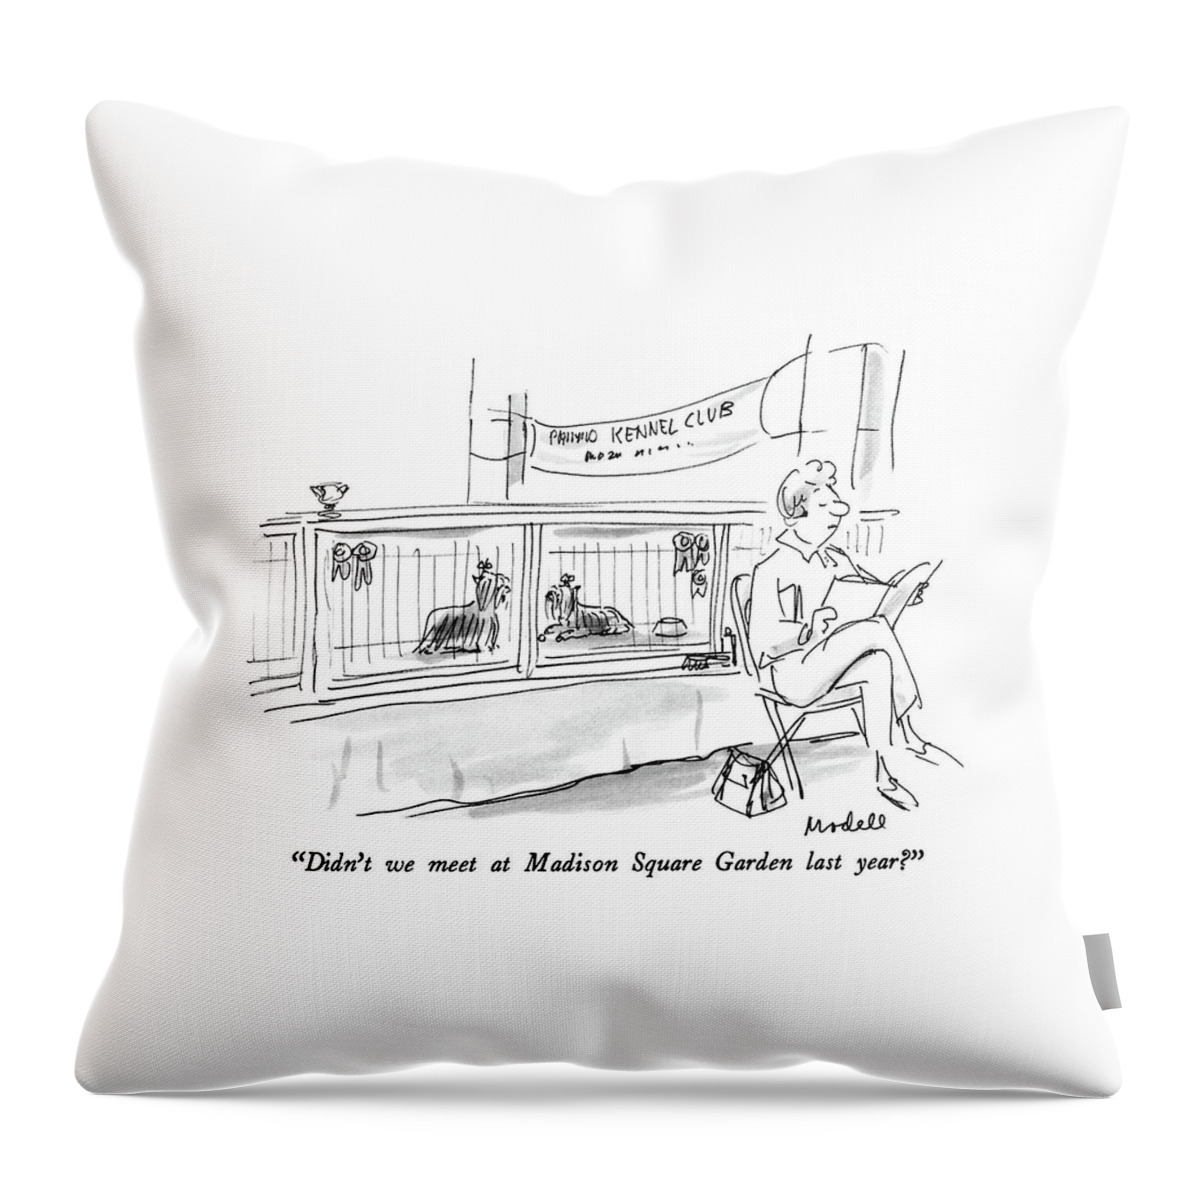 Didn't We Meet At Madison Square Garden Last Year? Throw Pillow